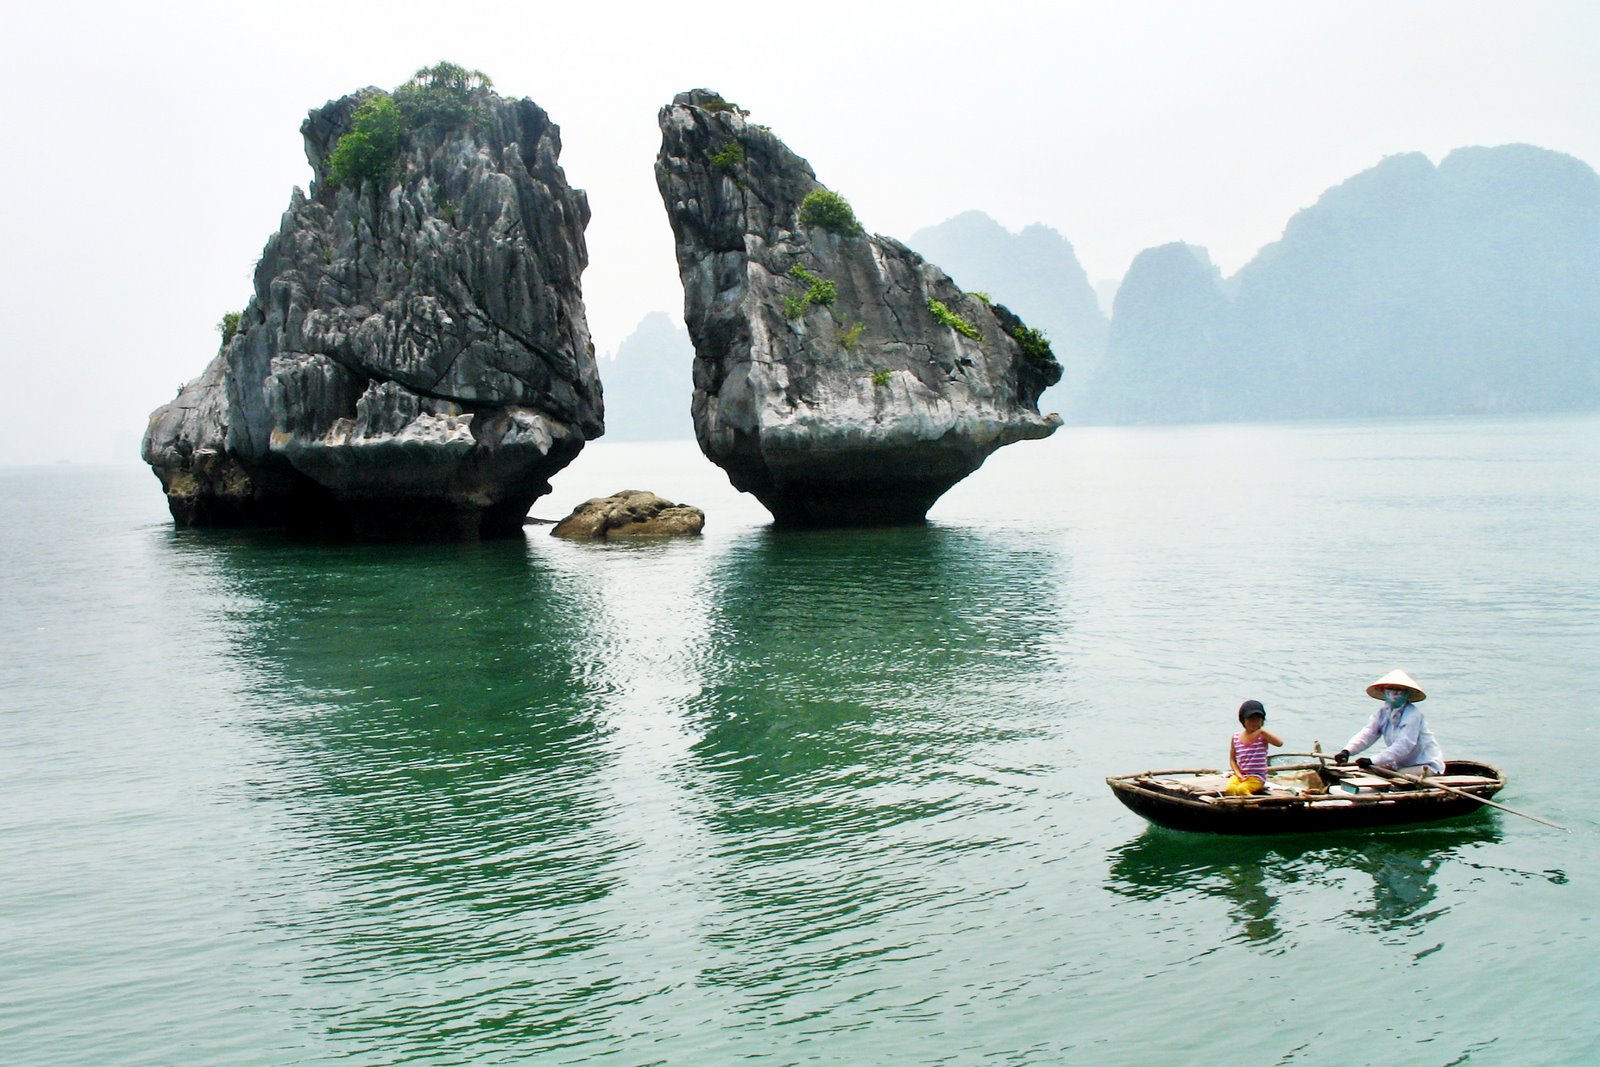 The weather in Halong Bay in May